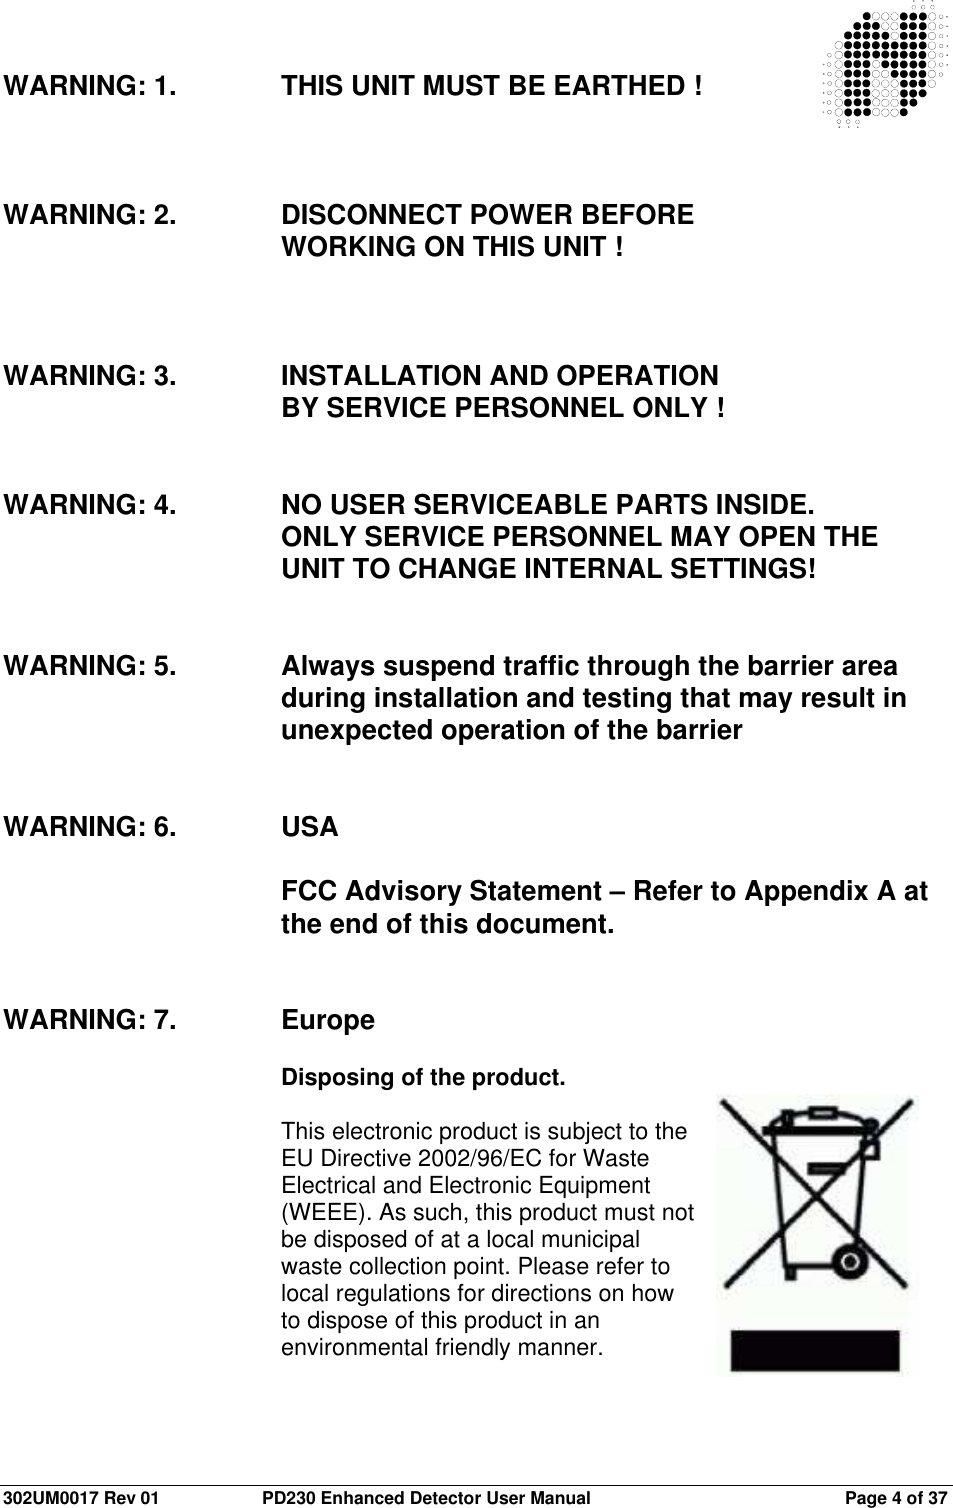  302UM0017 Rev 01  PD230 Enhanced Detector User Manual   Page 4 of 37  WARNING: 1.  THIS UNIT MUST BE EARTHED !    WARNING: 2.  DISCONNECT POWER BEFORE  WORKING ON THIS UNIT !    WARNING: 3.  INSTALLATION AND OPERATION    BY SERVICE PERSONNEL ONLY !   WARNING: 4.  NO USER SERVICEABLE PARTS INSIDE.  ONLY SERVICE PERSONNEL MAY OPEN THE UNIT TO CHANGE INTERNAL SETTINGS!   WARNING: 5.  Always suspend traffic through the barrier area during installation and testing that may result in unexpected operation of the barrier   WARNING: 6.  USA  FCC Advisory Statement – Refer to Appendix A at the end of this document.   WARNING: 7.  Europe  Disposing of the product.  This electronic product is subject to the EU Directive 2002/96/EC for Waste Electrical and Electronic Equipment (WEEE). As such, this product must not be disposed of at a local municipal waste collection point. Please refer to local regulations for directions on how to dispose of this product in an environmental friendly manner.  